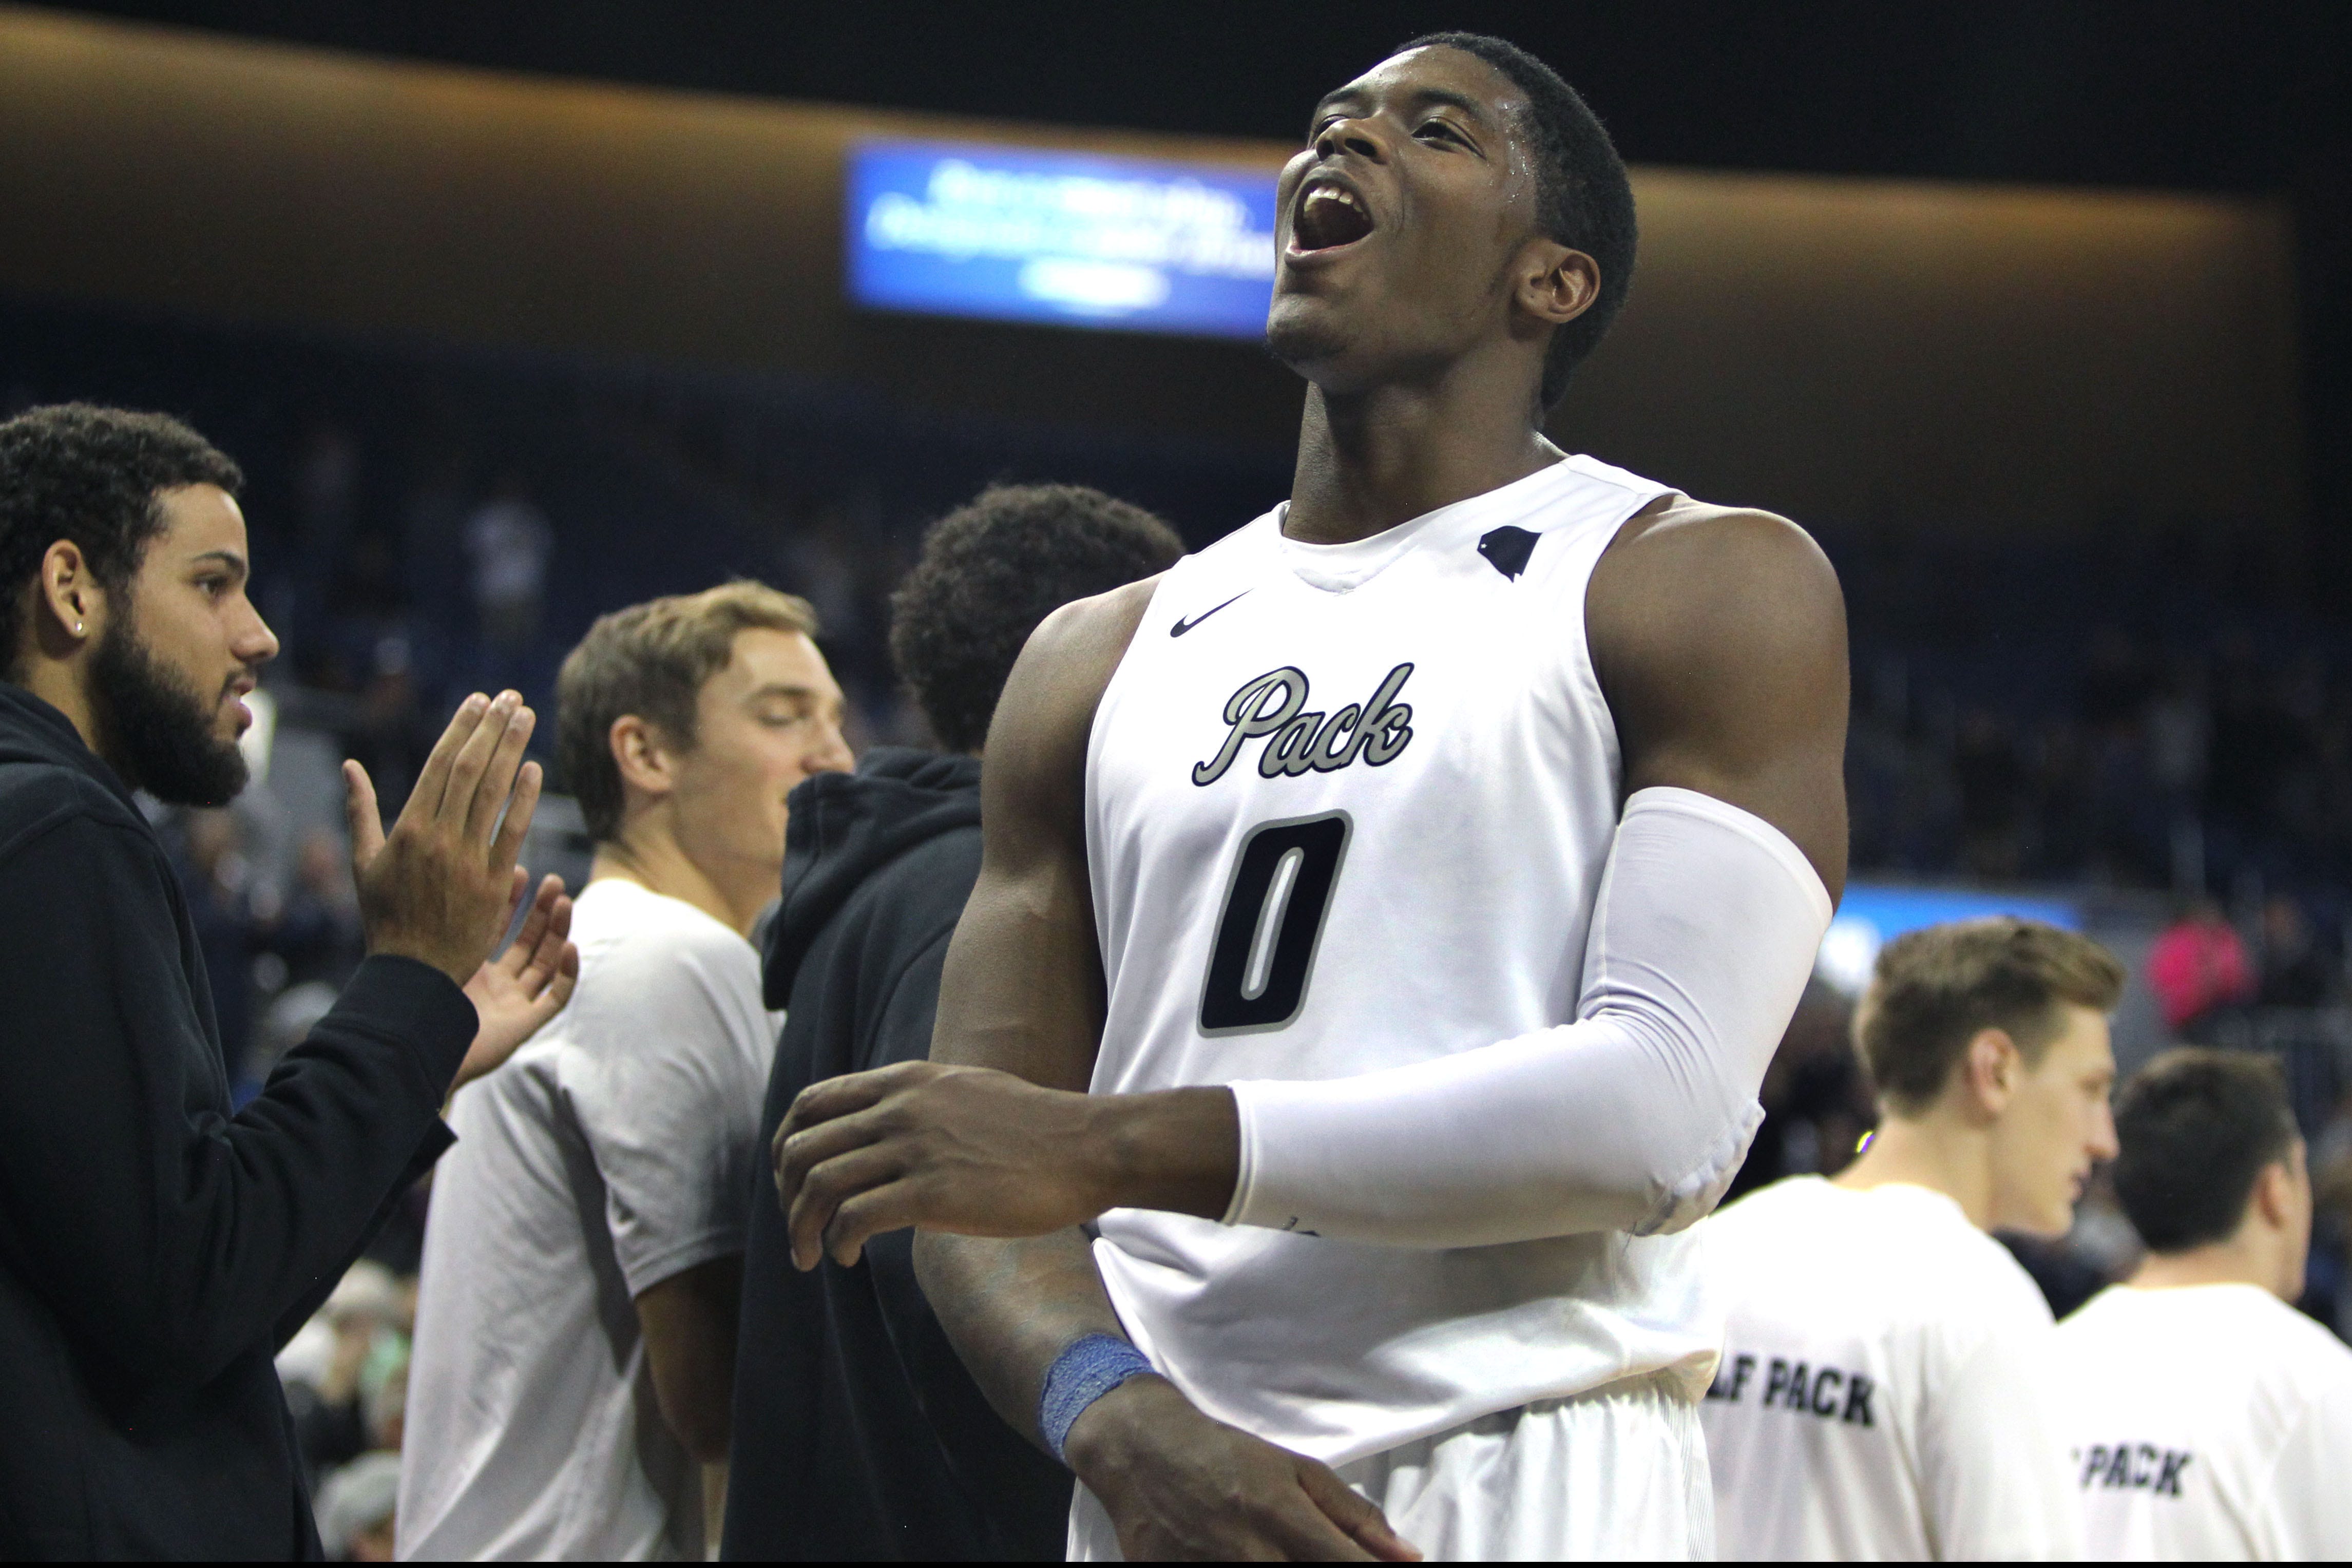 For Nevada's Cam Oliver, from Dollar Tree to NBA draft